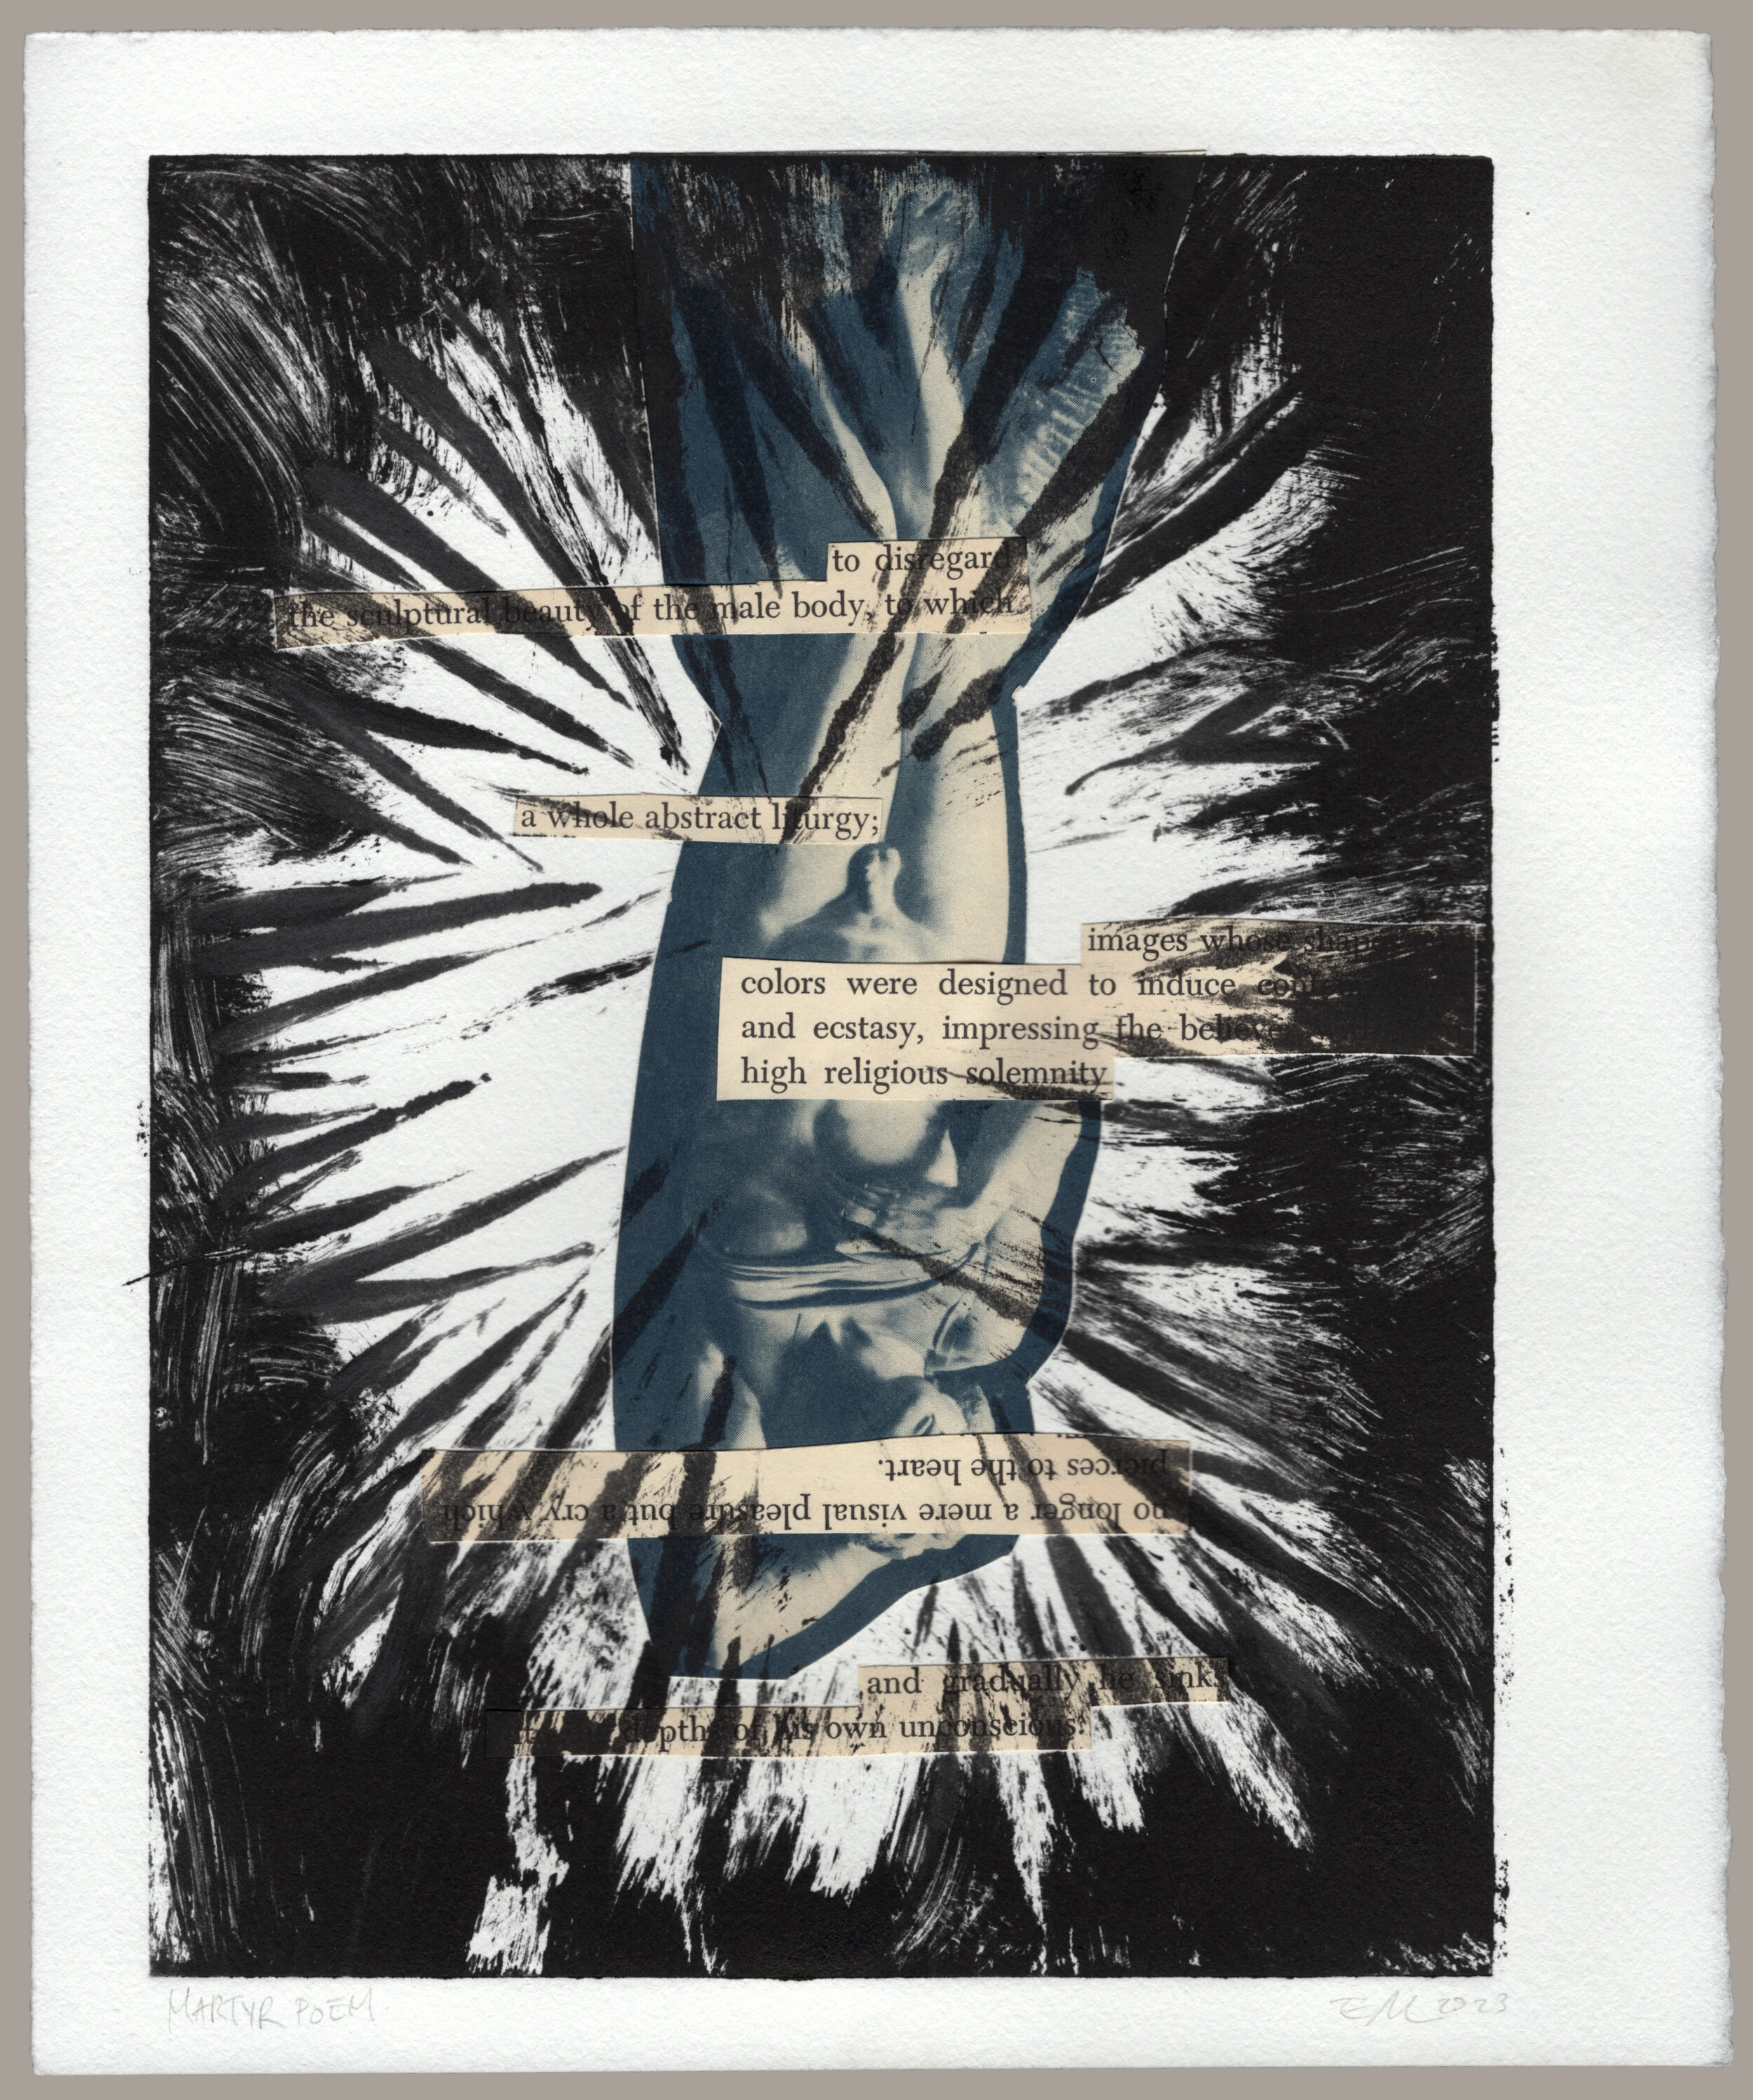 A monotype print of black spikes emanating from the sides of the plate with text cutouts and an upside down greco-roman statue pasted behind it. The text reads: 'to disregard the sculptural beauty of the male body, to which; a whole abstract liturgy; images whose shapes and colors were designed to induce [unreadable text] and ecstasy impressing the [unreadable text] high religious solemnity; [following upside down] no longer a mere visual pleasure but a cry which pierces to the heart; [following right side up again] into the depth of his own unconcious.' The print is signed: 'Martyr Poem, Em 2023'